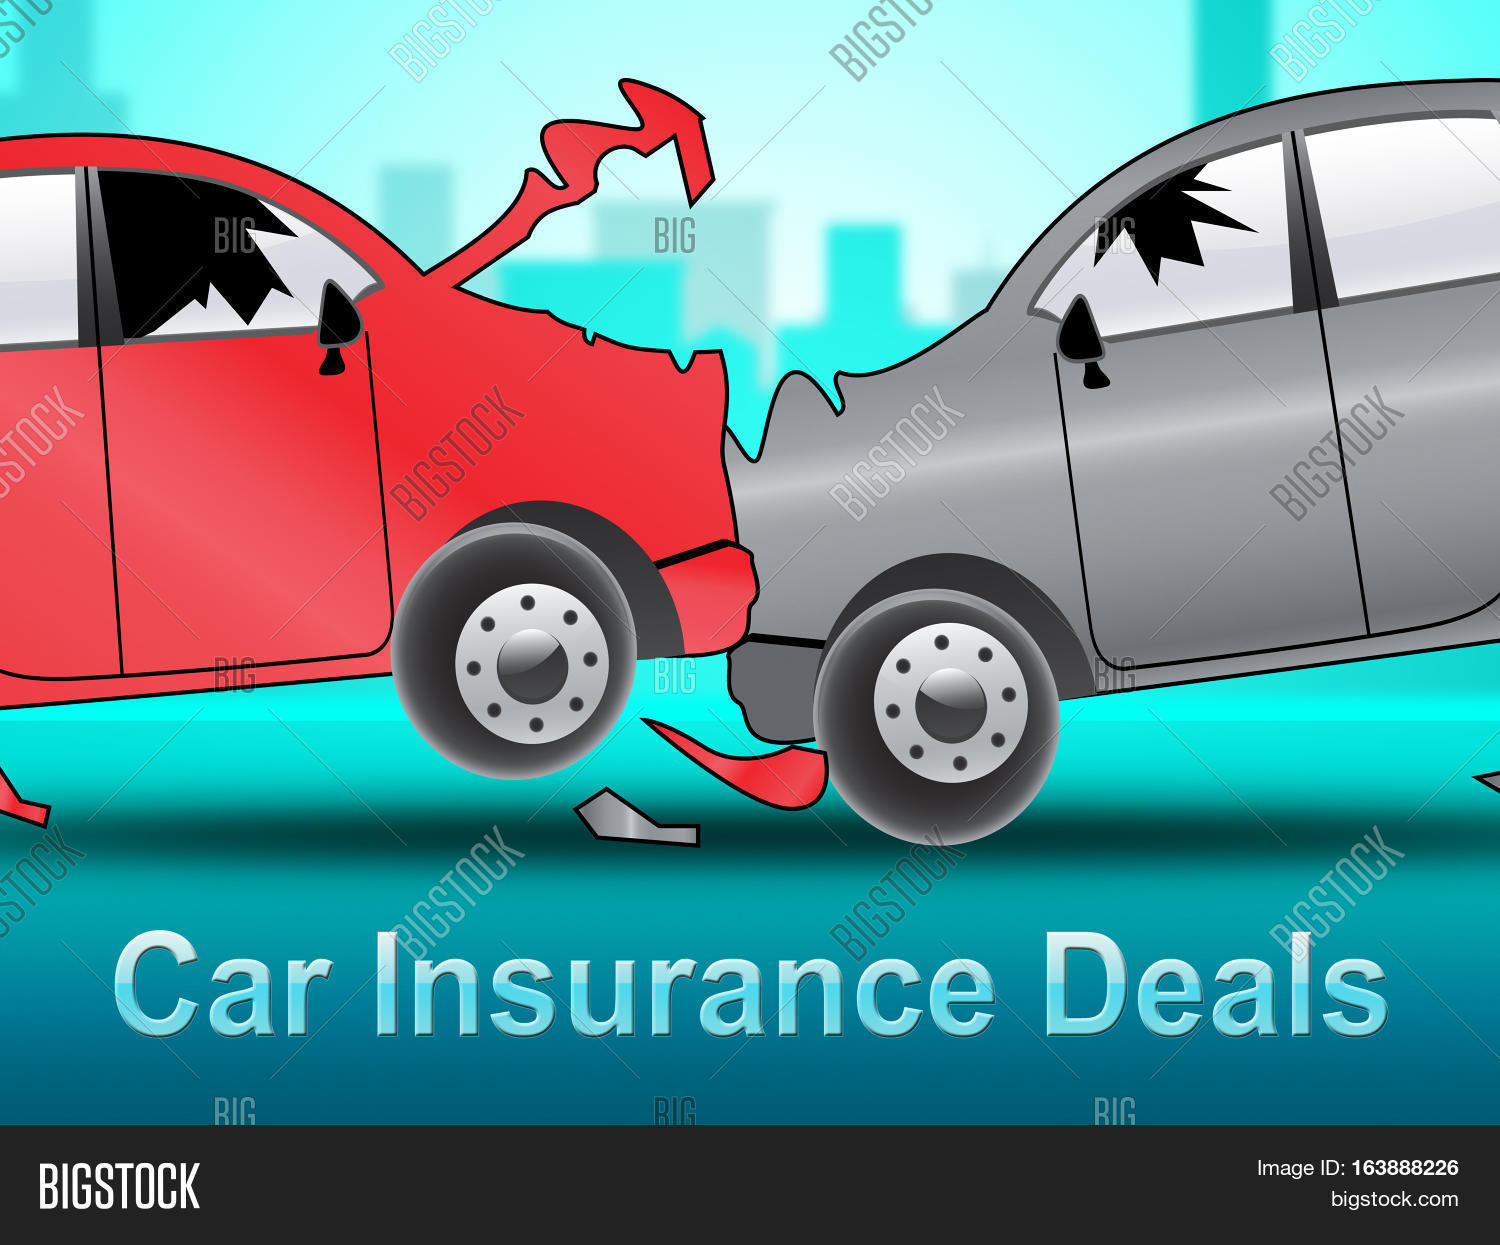 Car Insurance Deals Image Photo Free Trial Bigstock in sizing 1500 X 1245